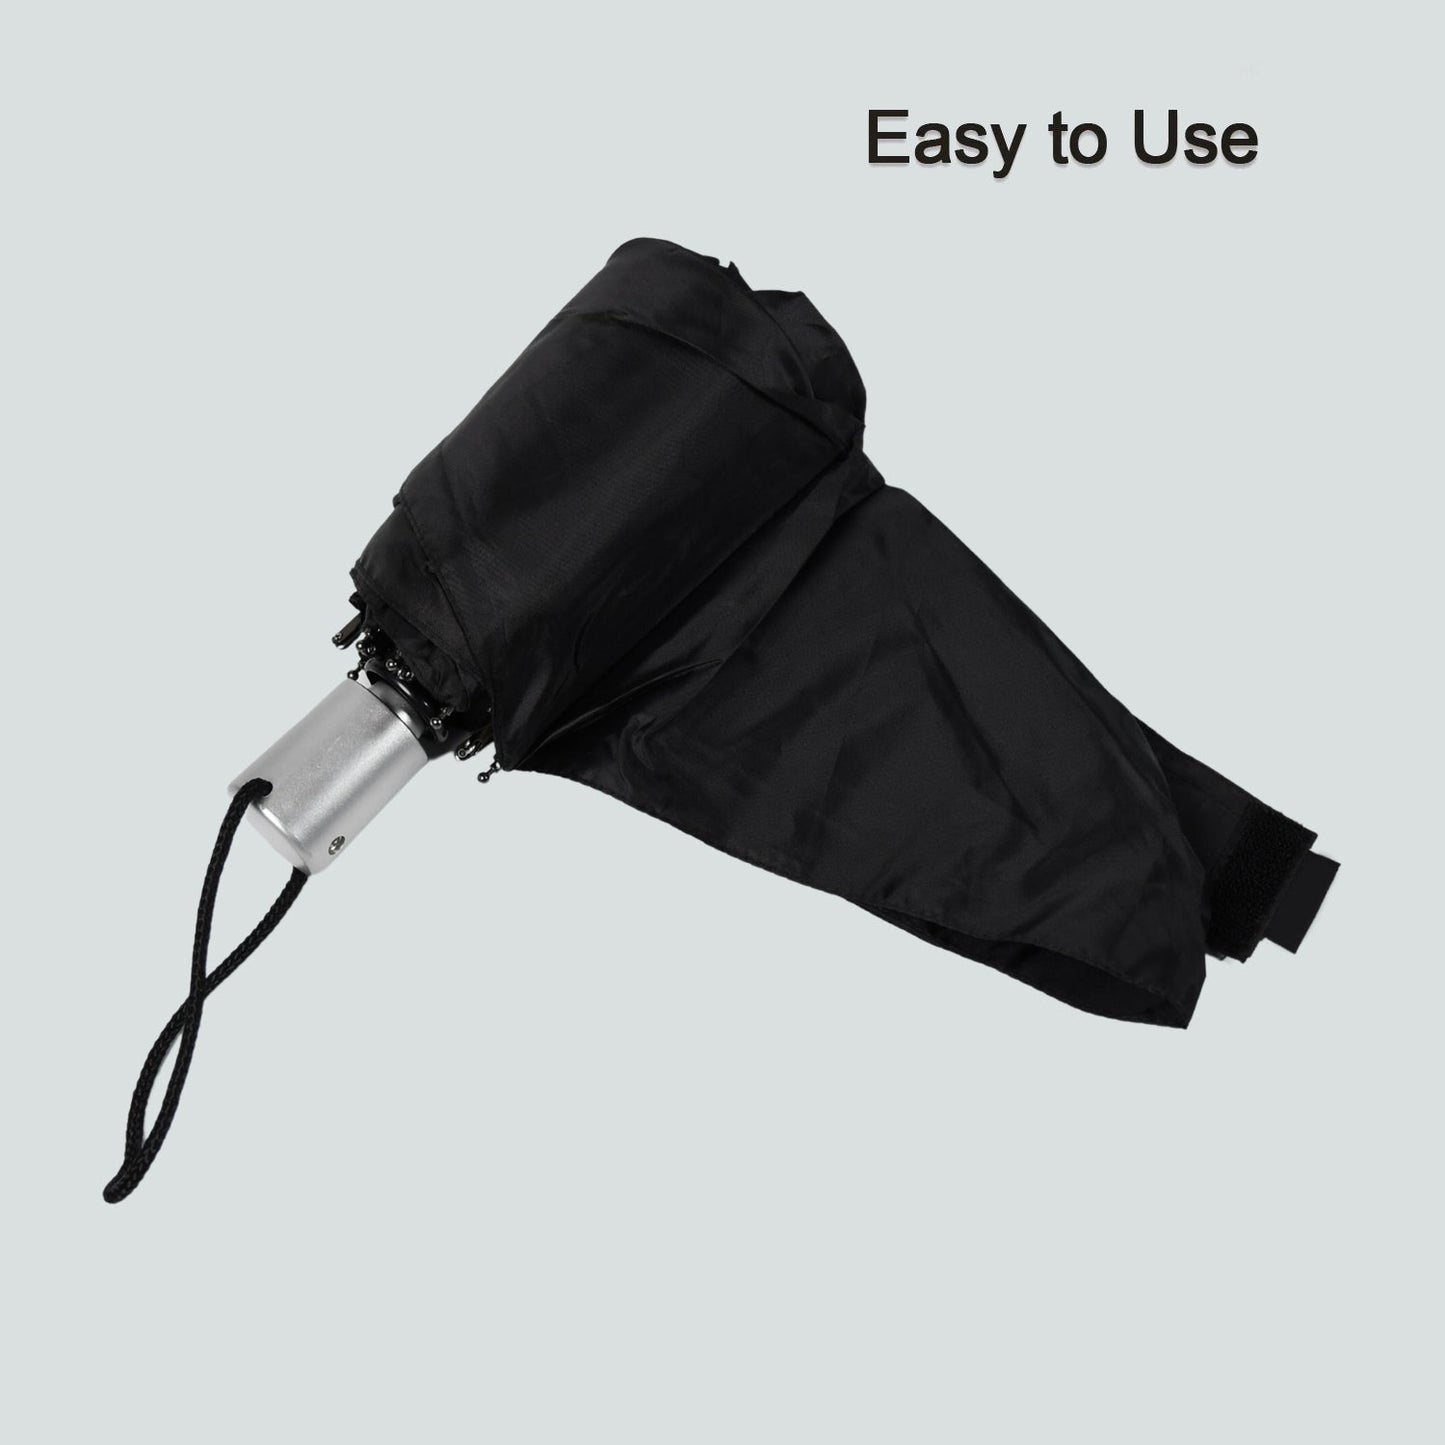 Windproof Travel Umbrella - Compact, Light, Automatic, Strong and Portable - Wind Resistant, Small Folding Backpack Umbrella for Rain